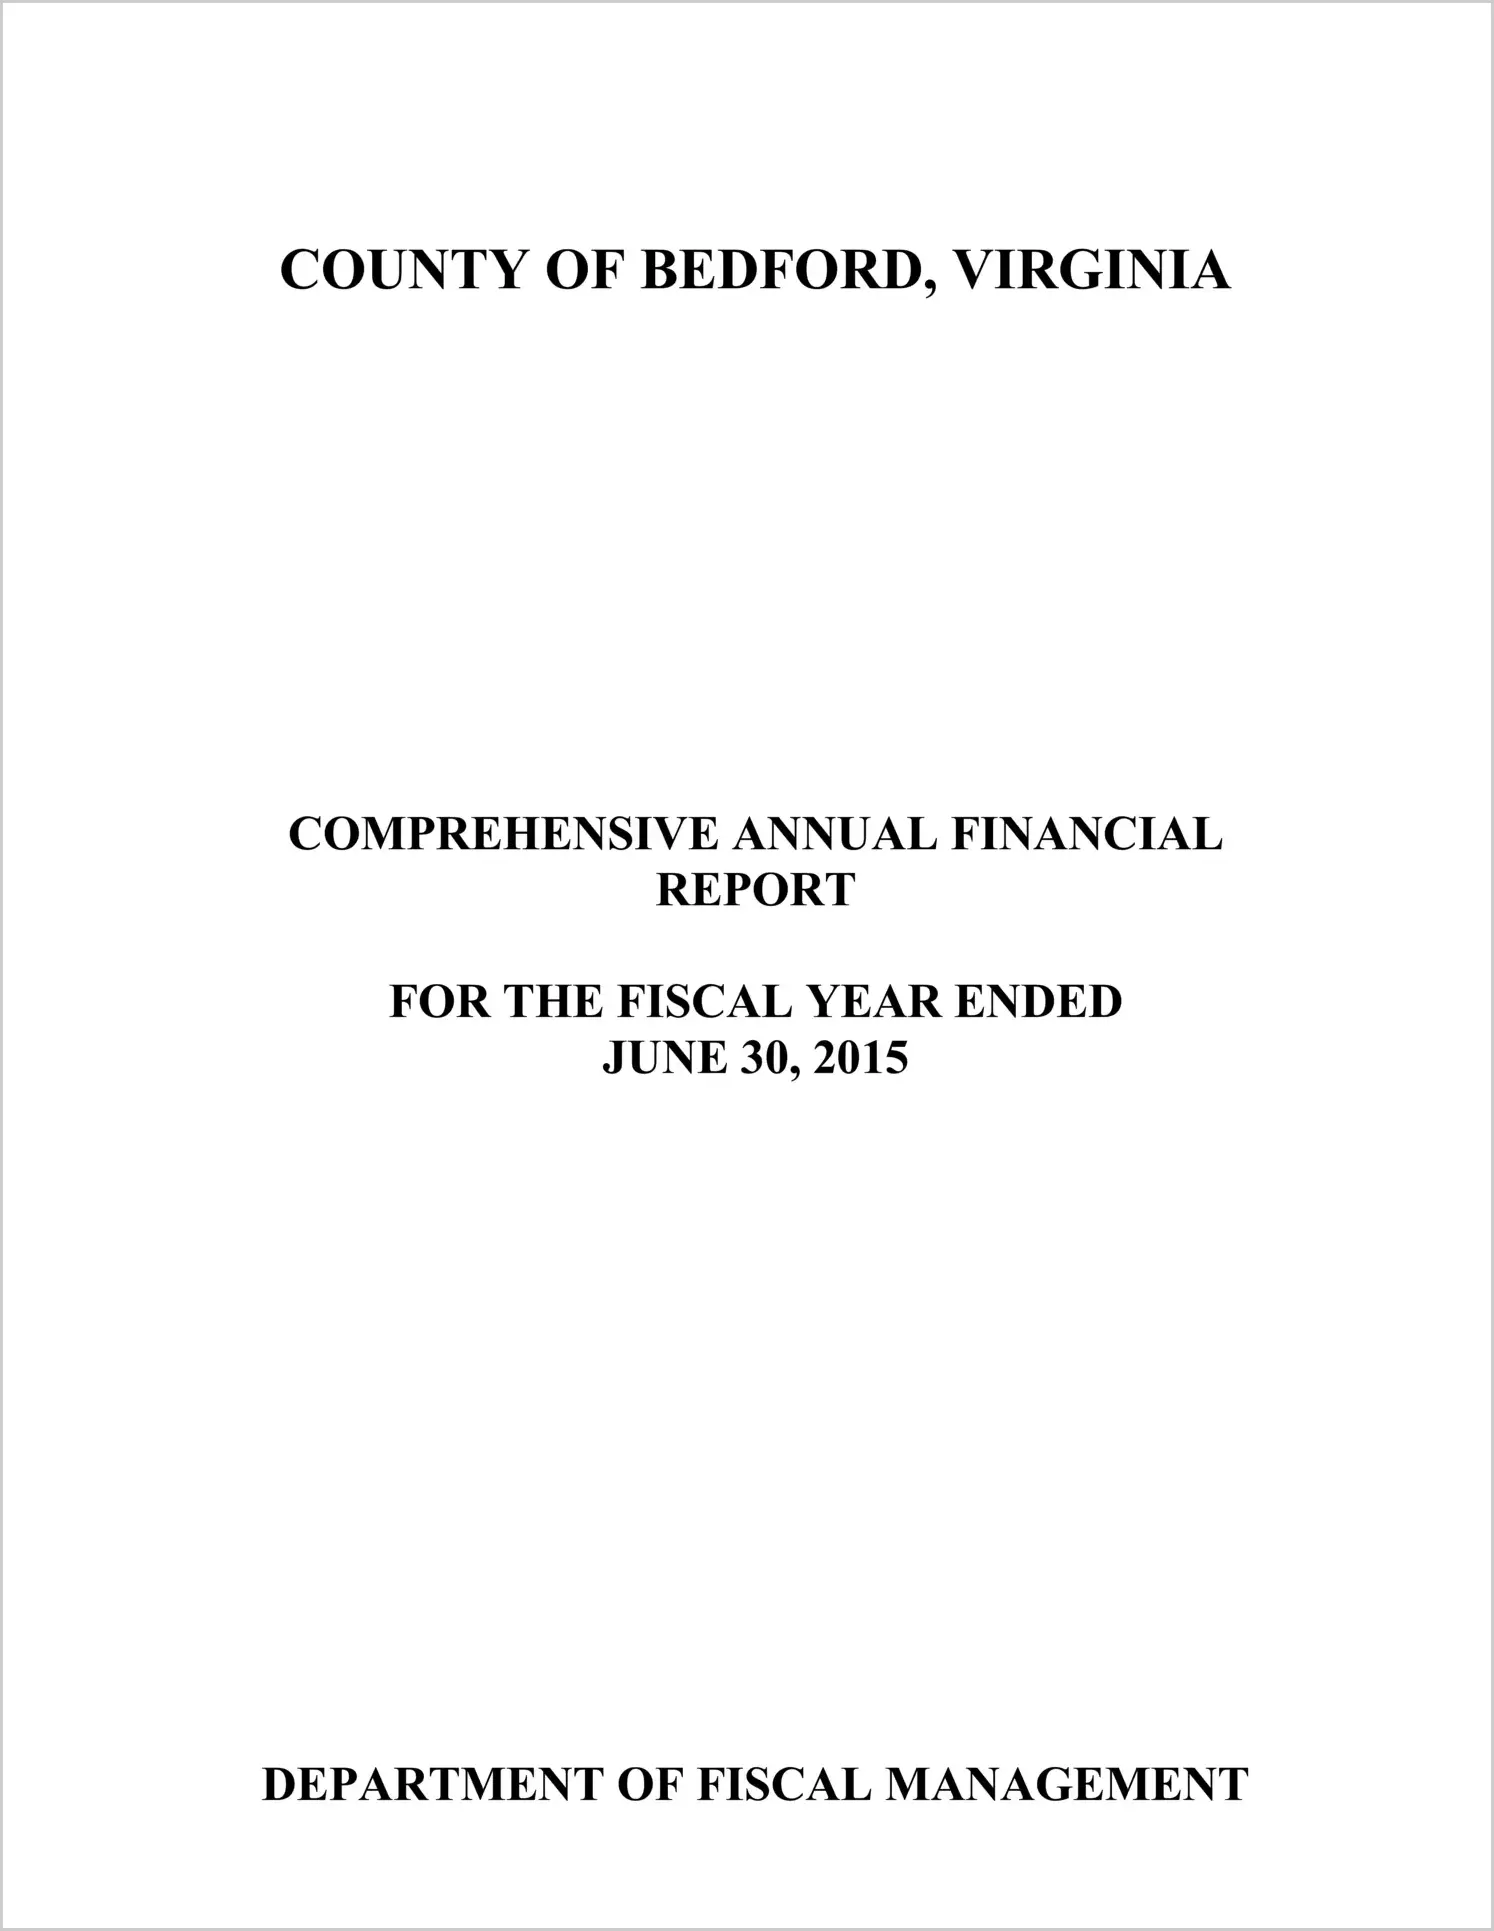 2015 Annual Financial Report for County of Bedford